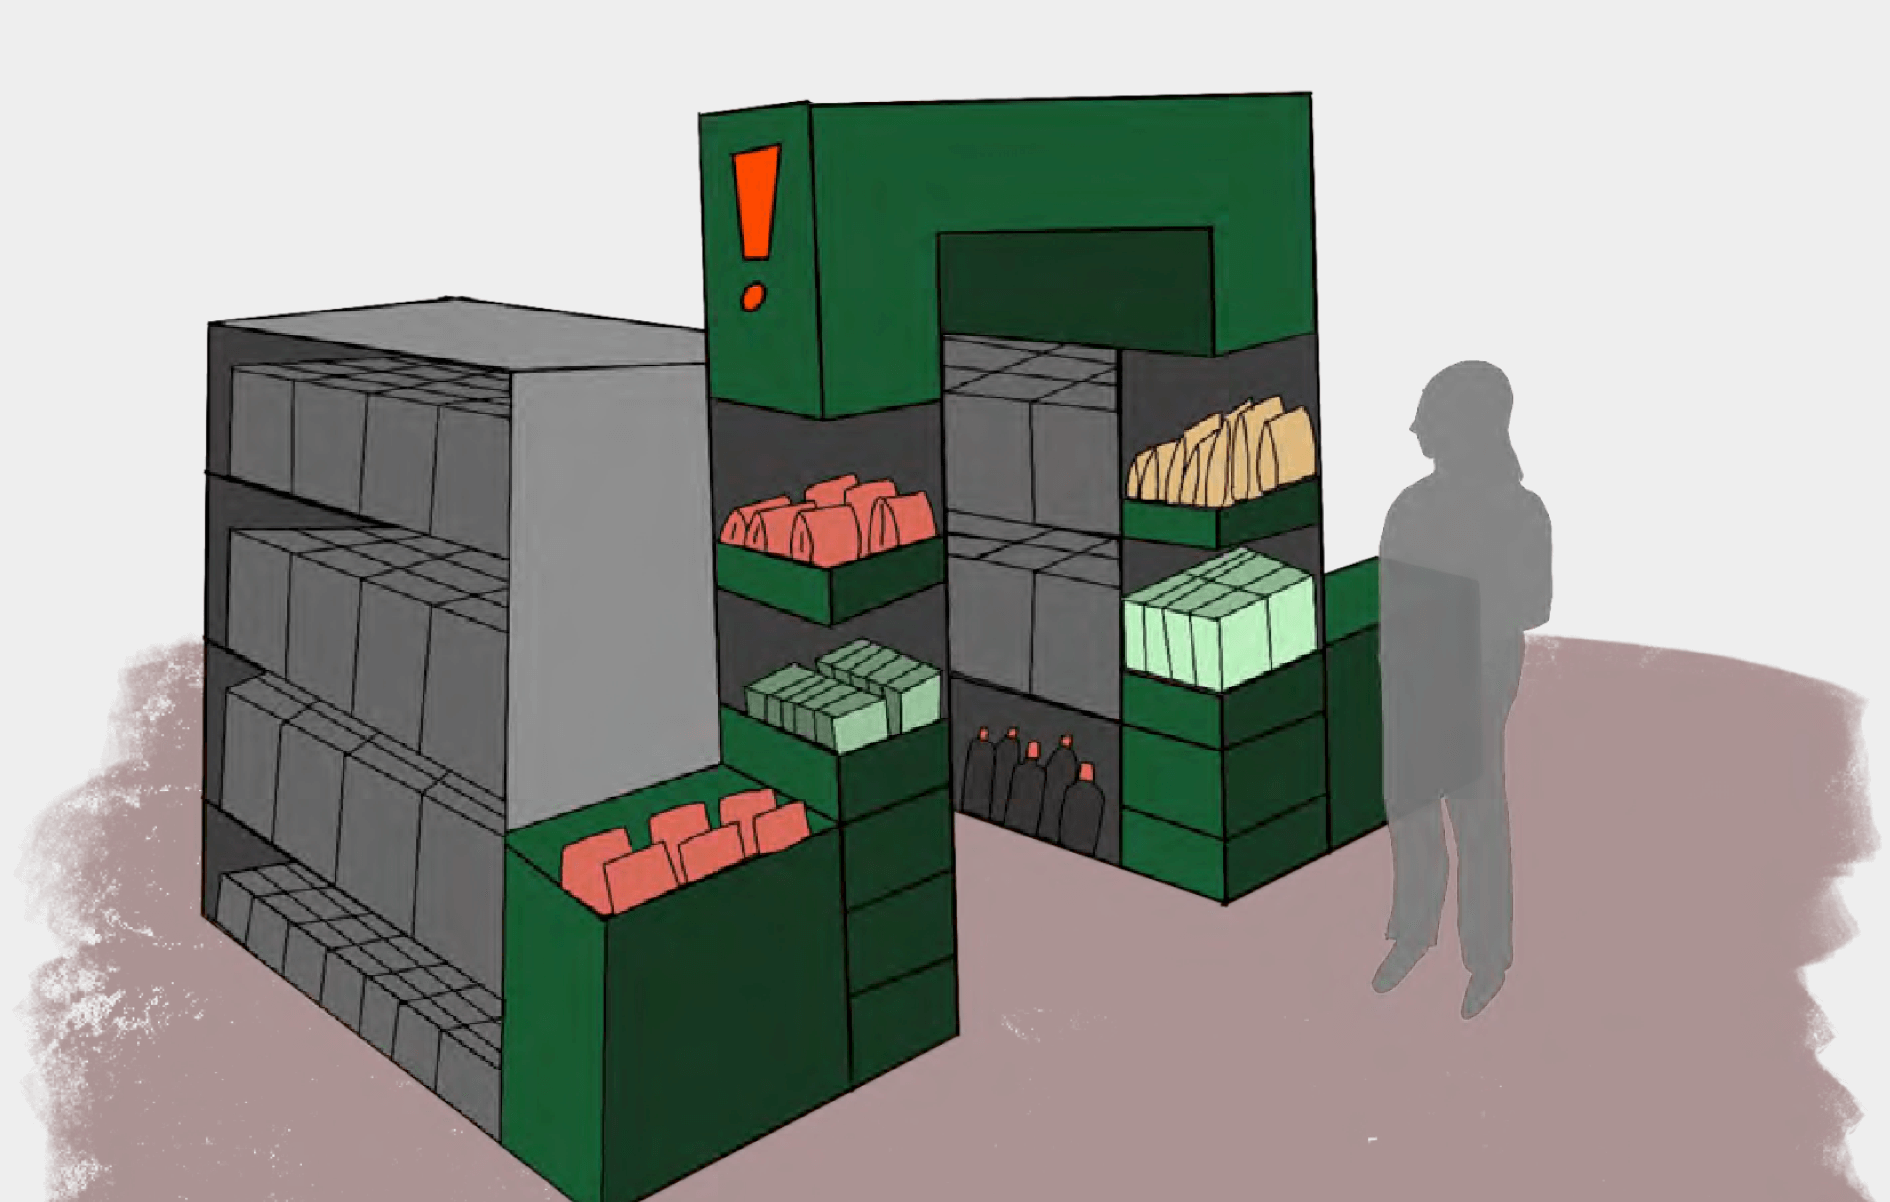 Outline of a shopper looking at a produce display